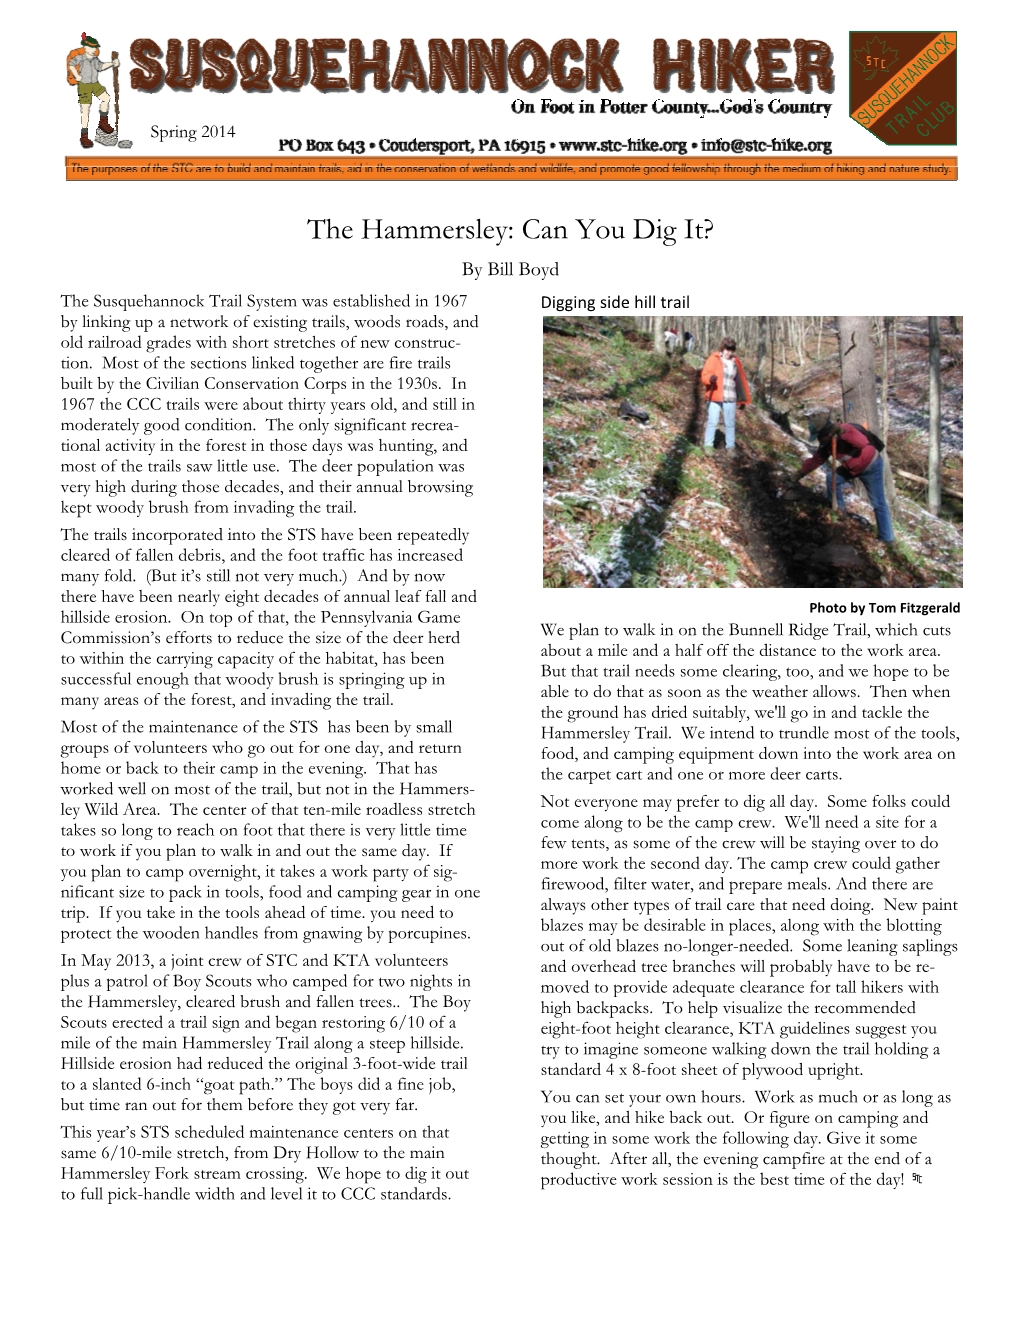 The Hammersley: Can You Dig